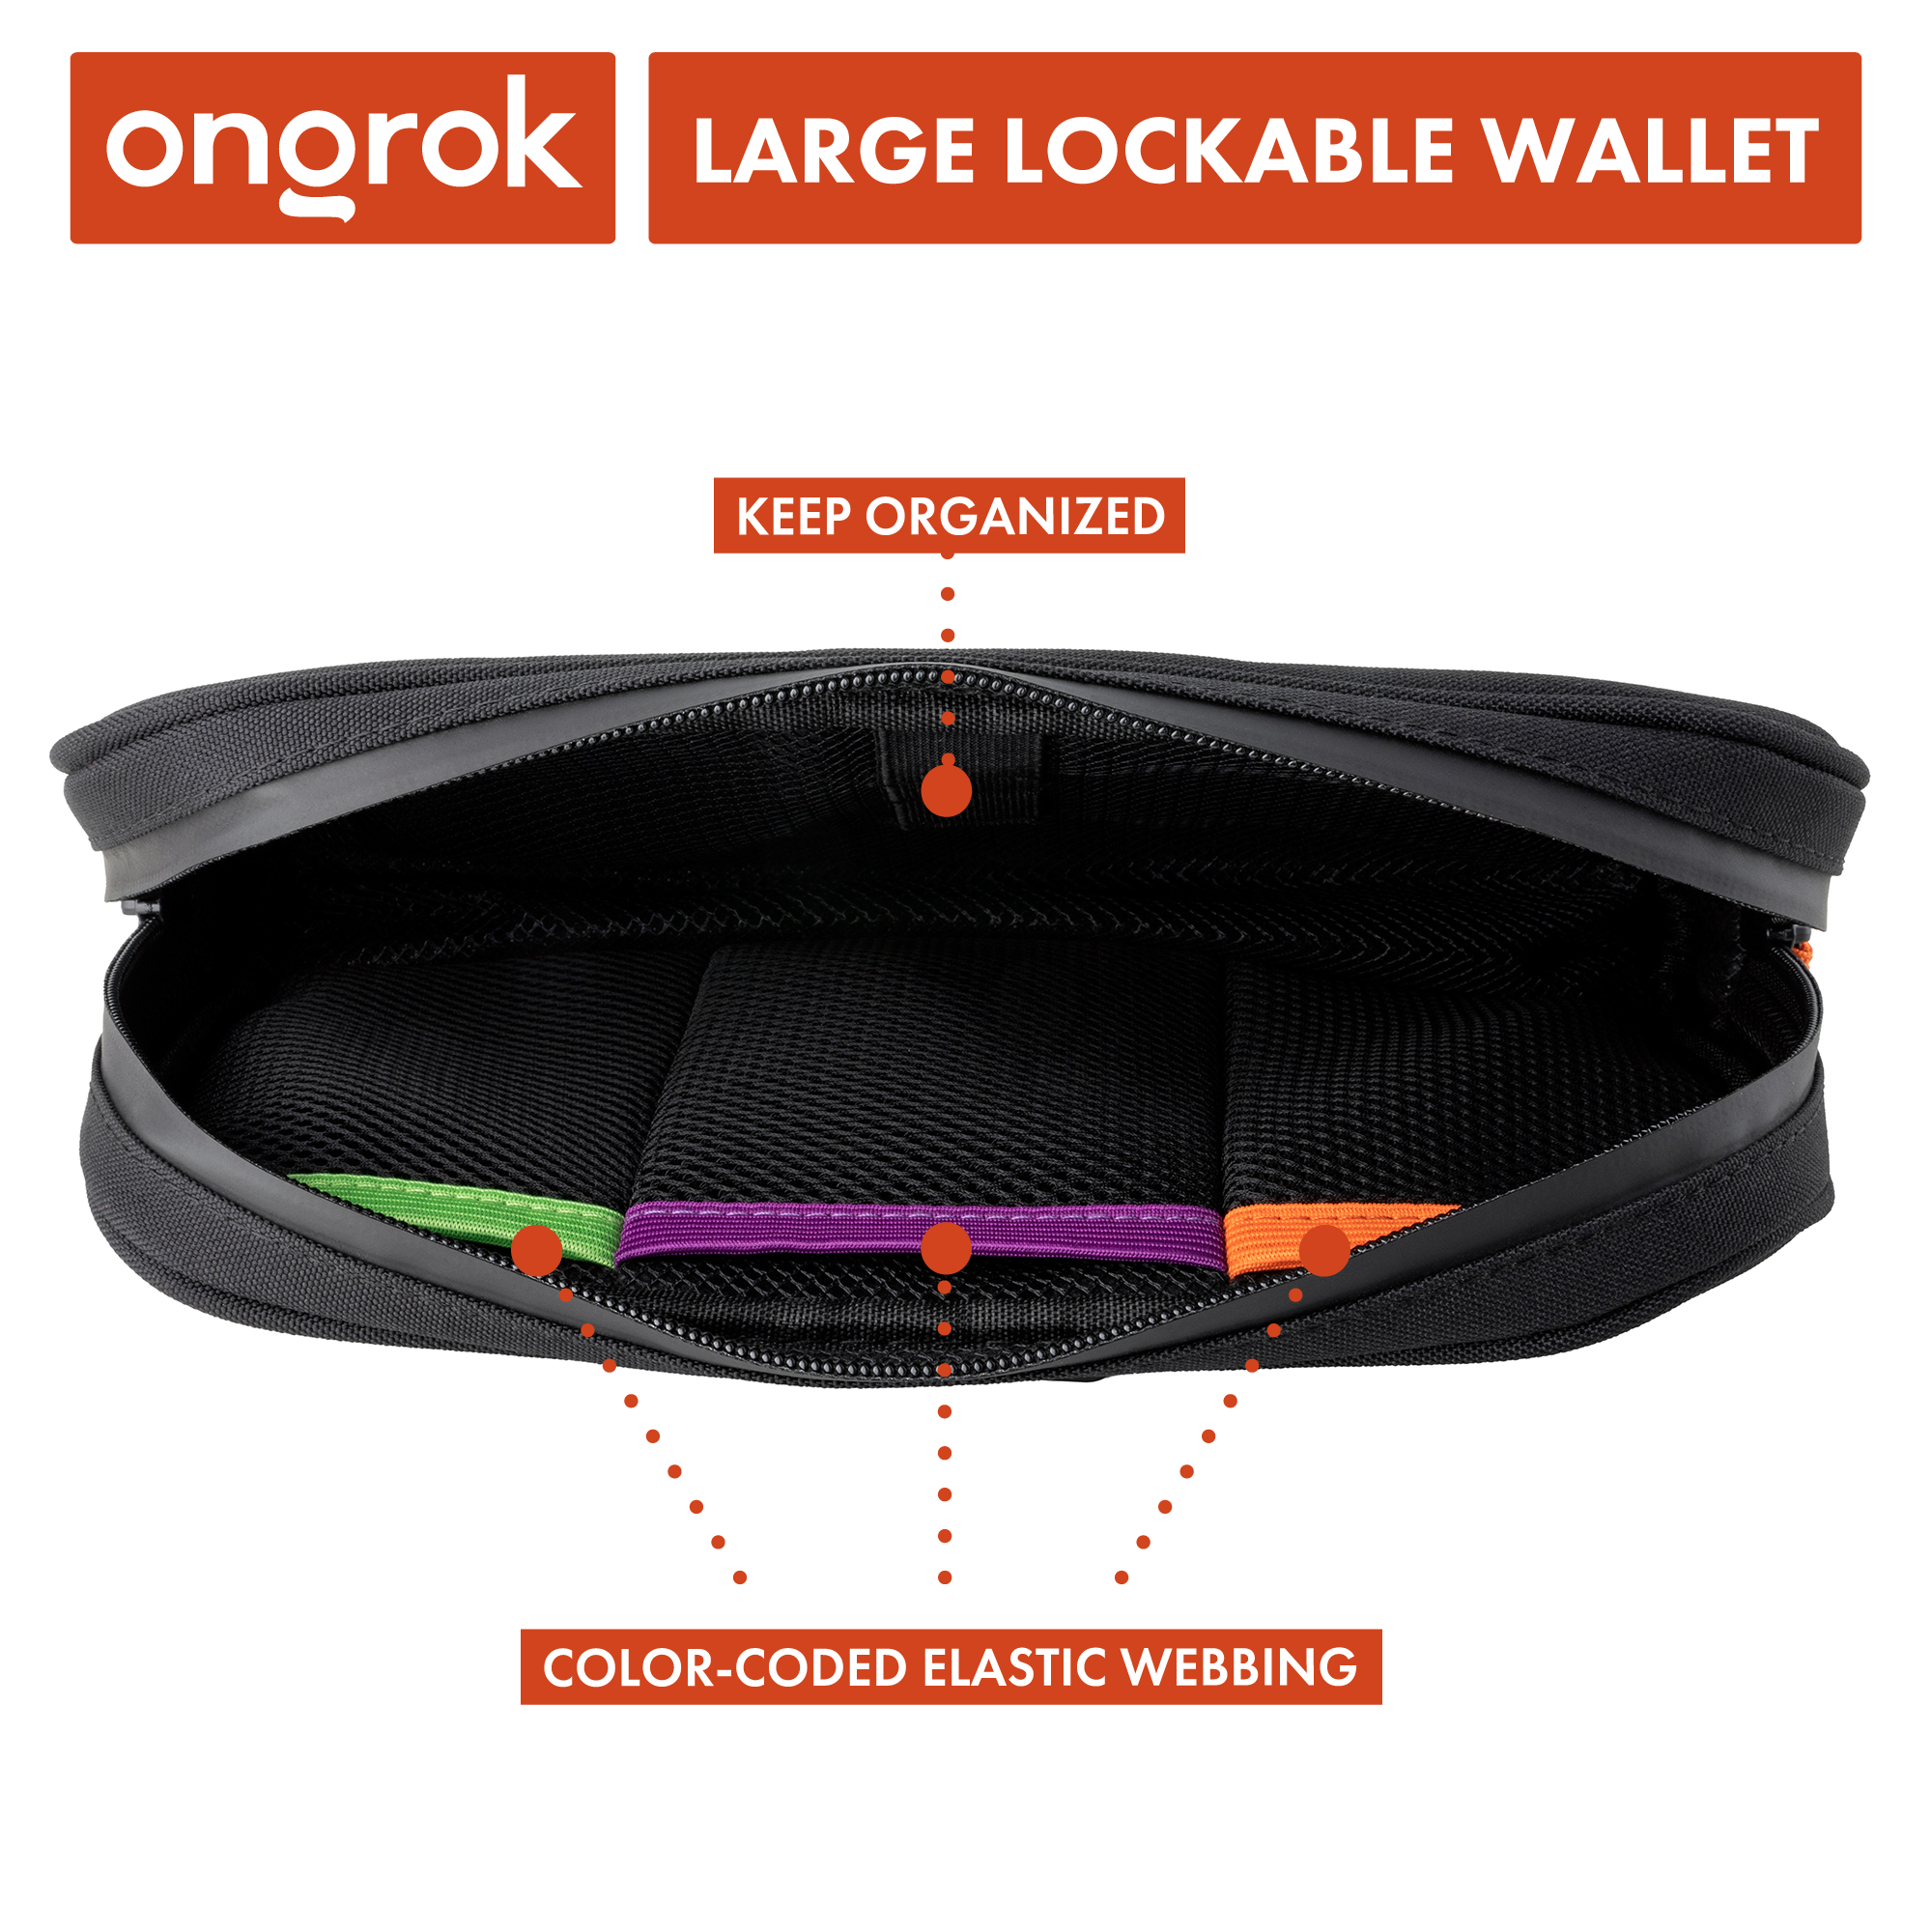 Ongrok Carbon-lined Wallets with Combination Lock V 2.0 | 3" Sizes (Small, Medium, Large)